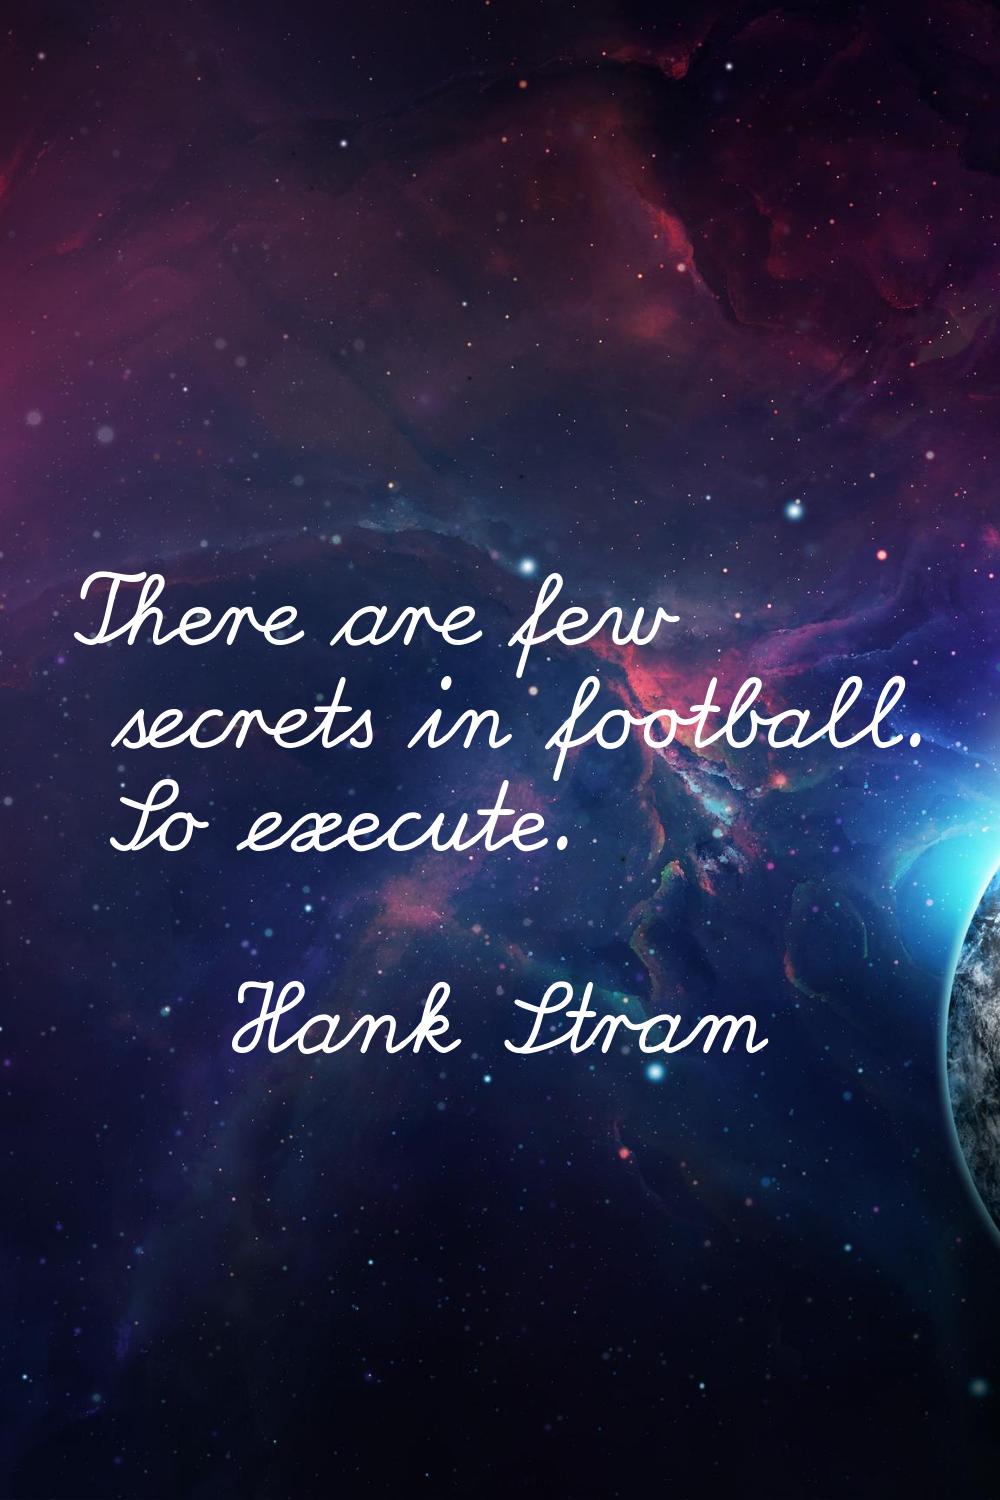 There are few secrets in football. So execute.